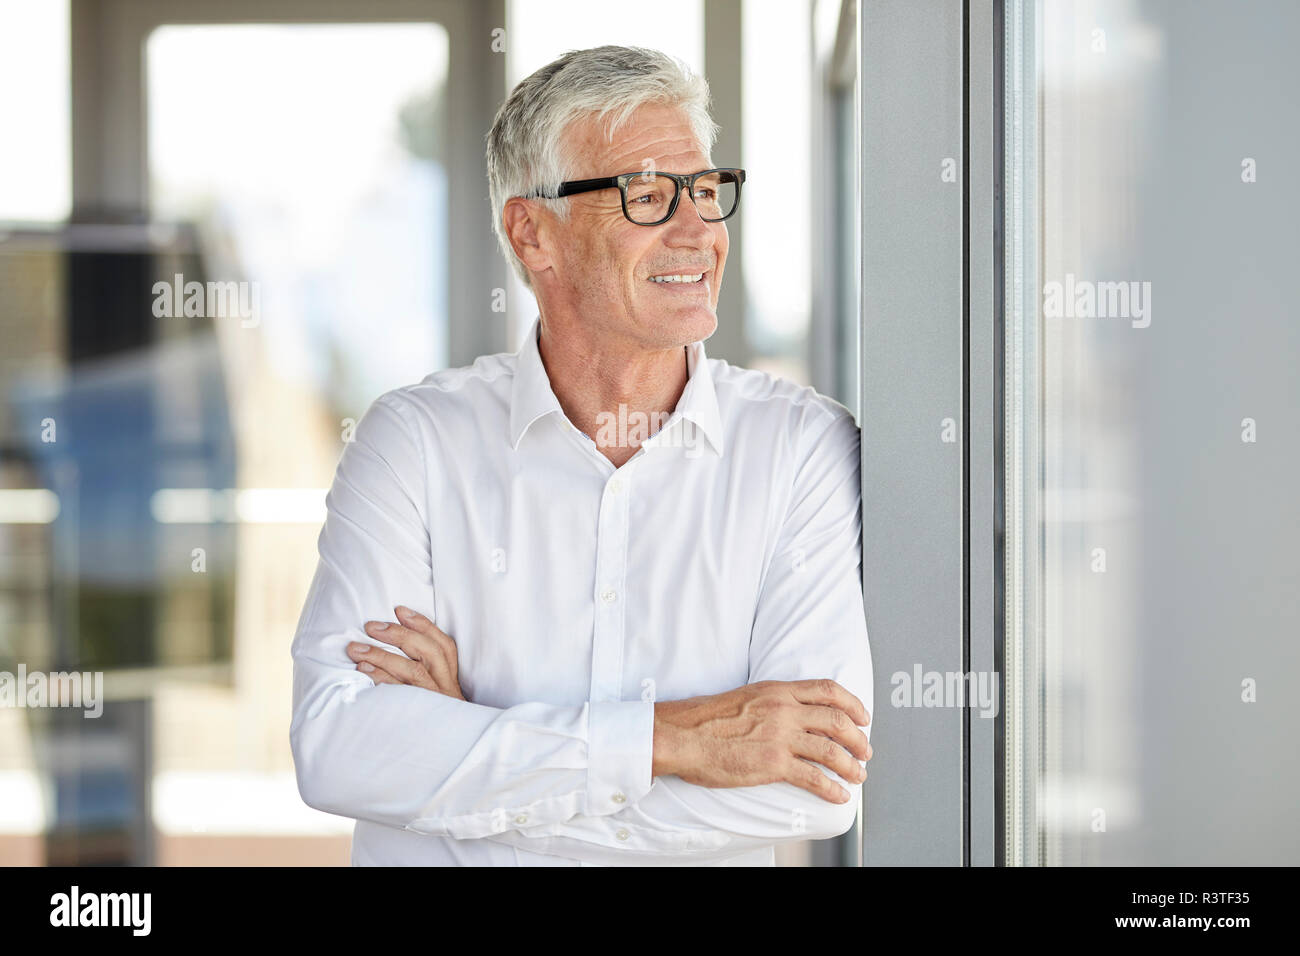 Businessman in office leaning against window, with arms crossed Stock Photo